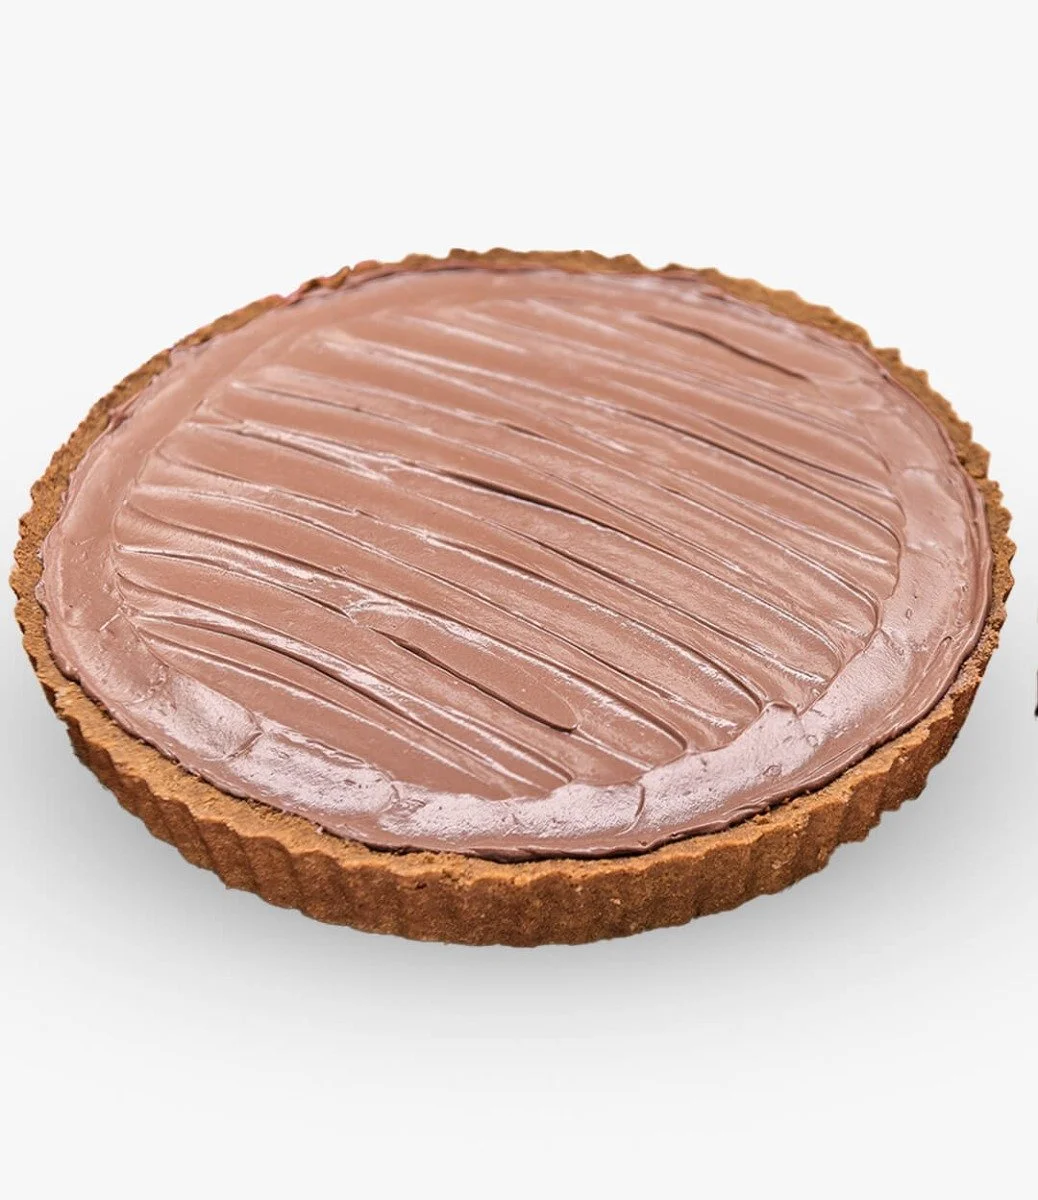 Nutella Pie By Looshi's